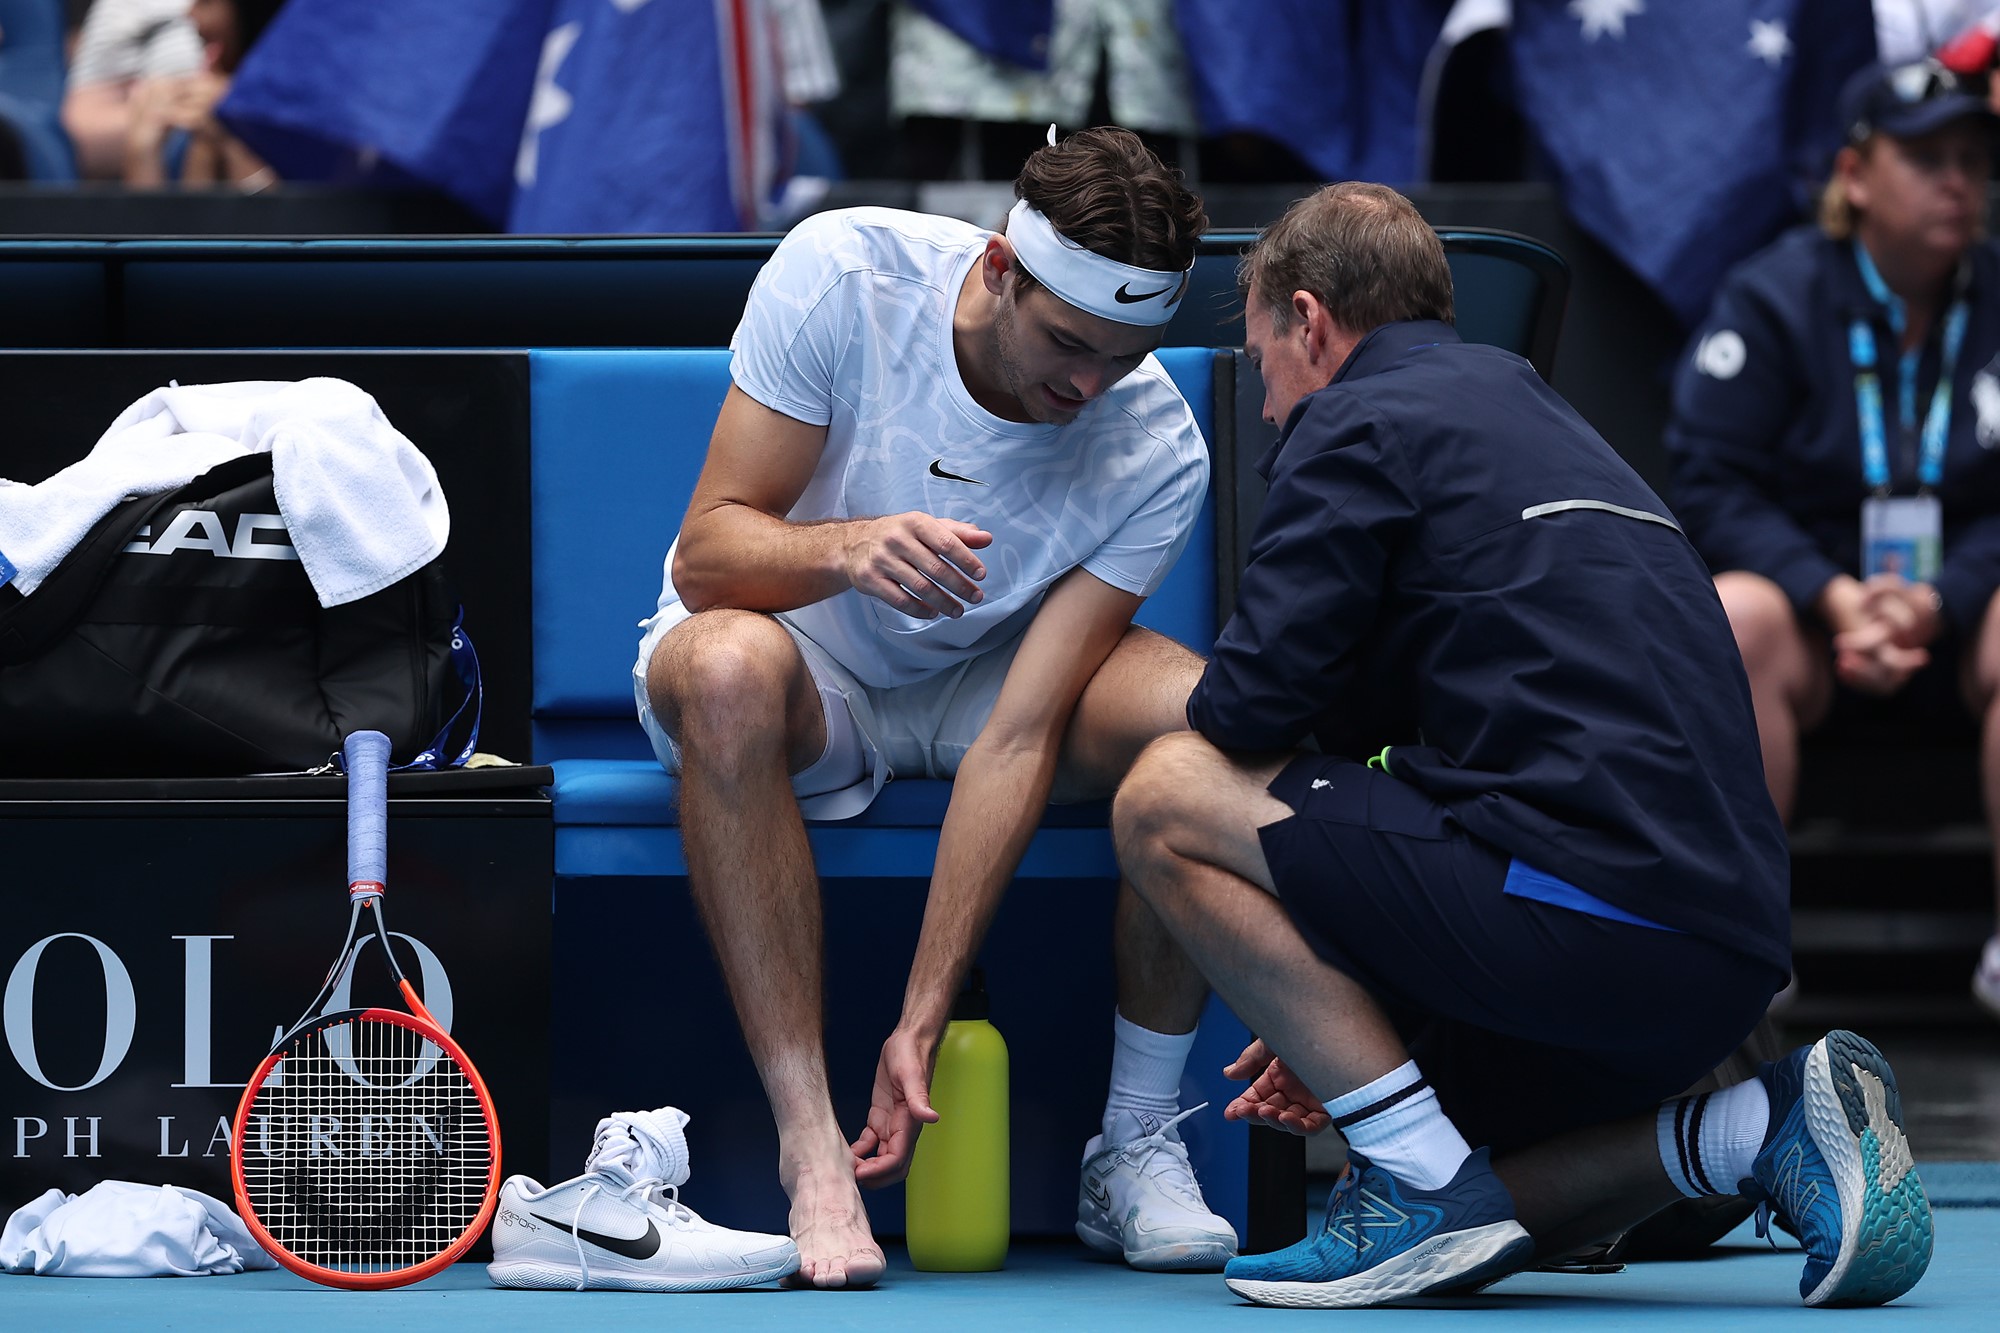 A tennis player and a phyios examine the payer's leg.